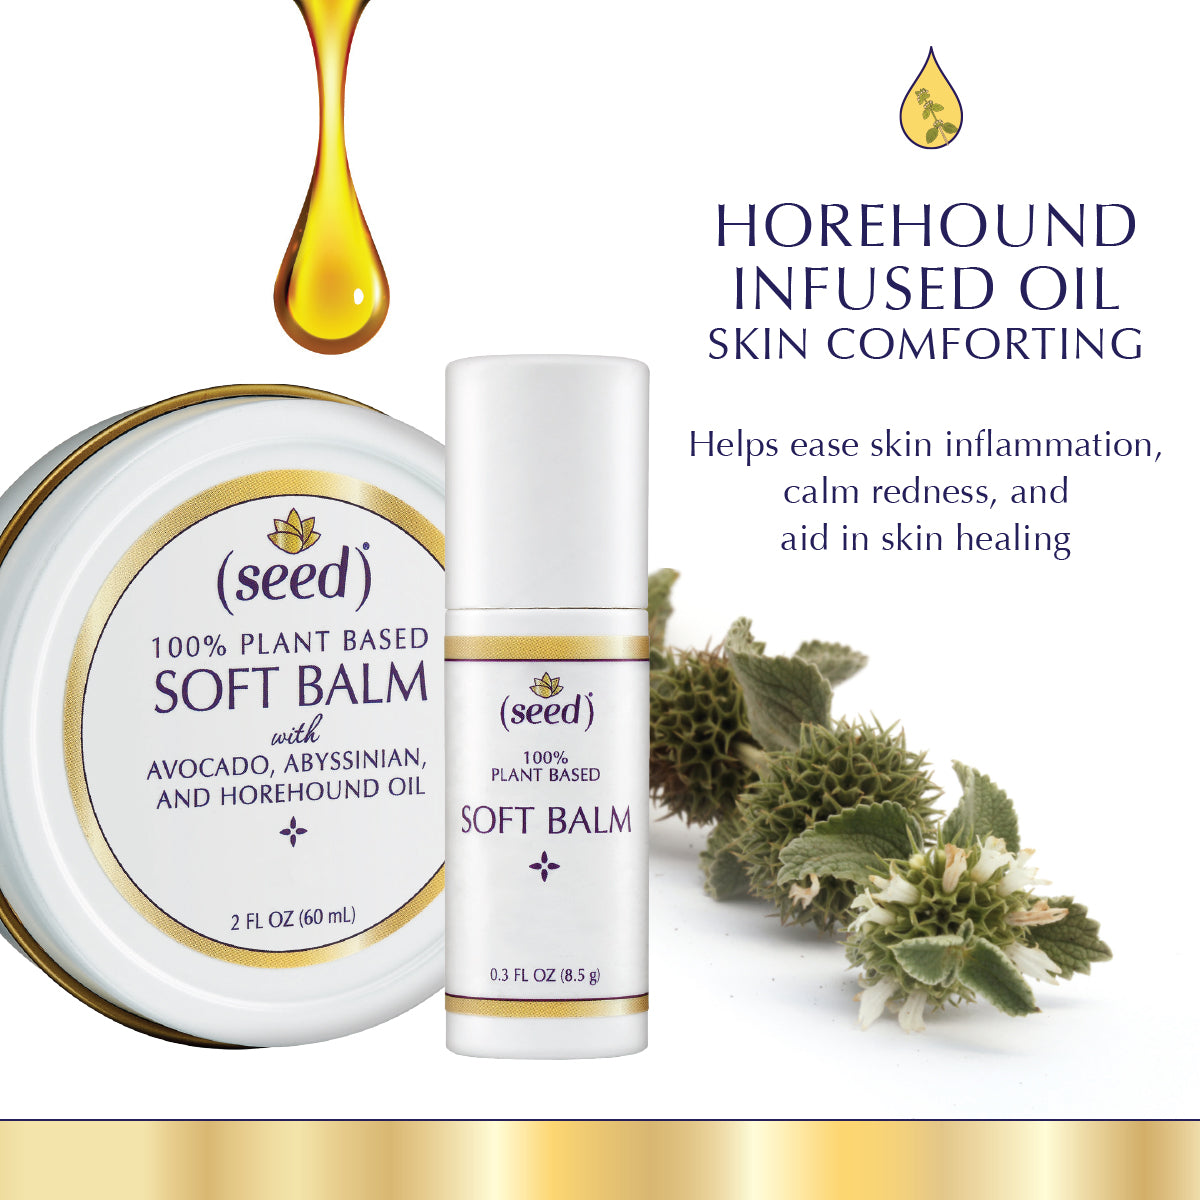 Seed Soft Balms feature horehound infused oil to comfort skin